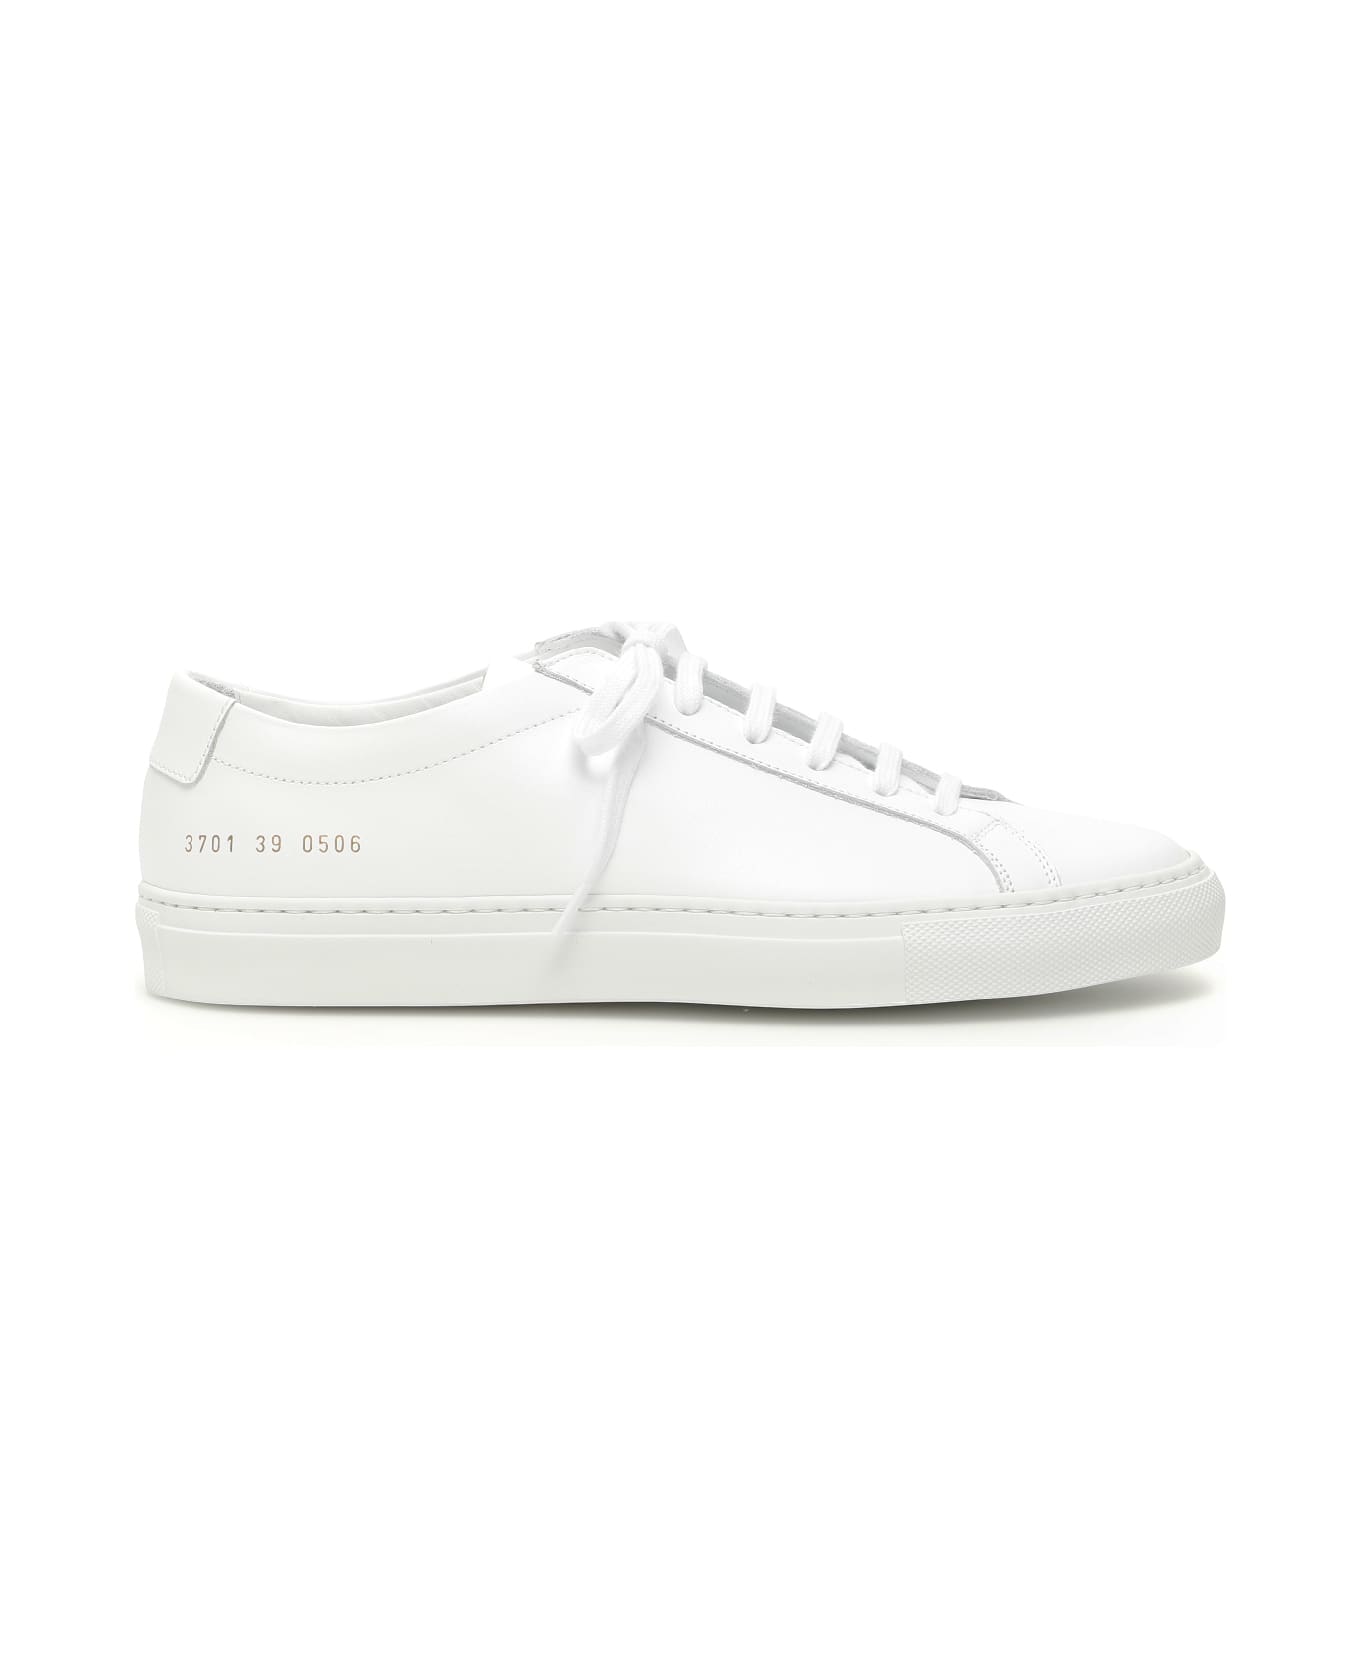 Common Projects Original Achilles Leather Sneakers - Bianco